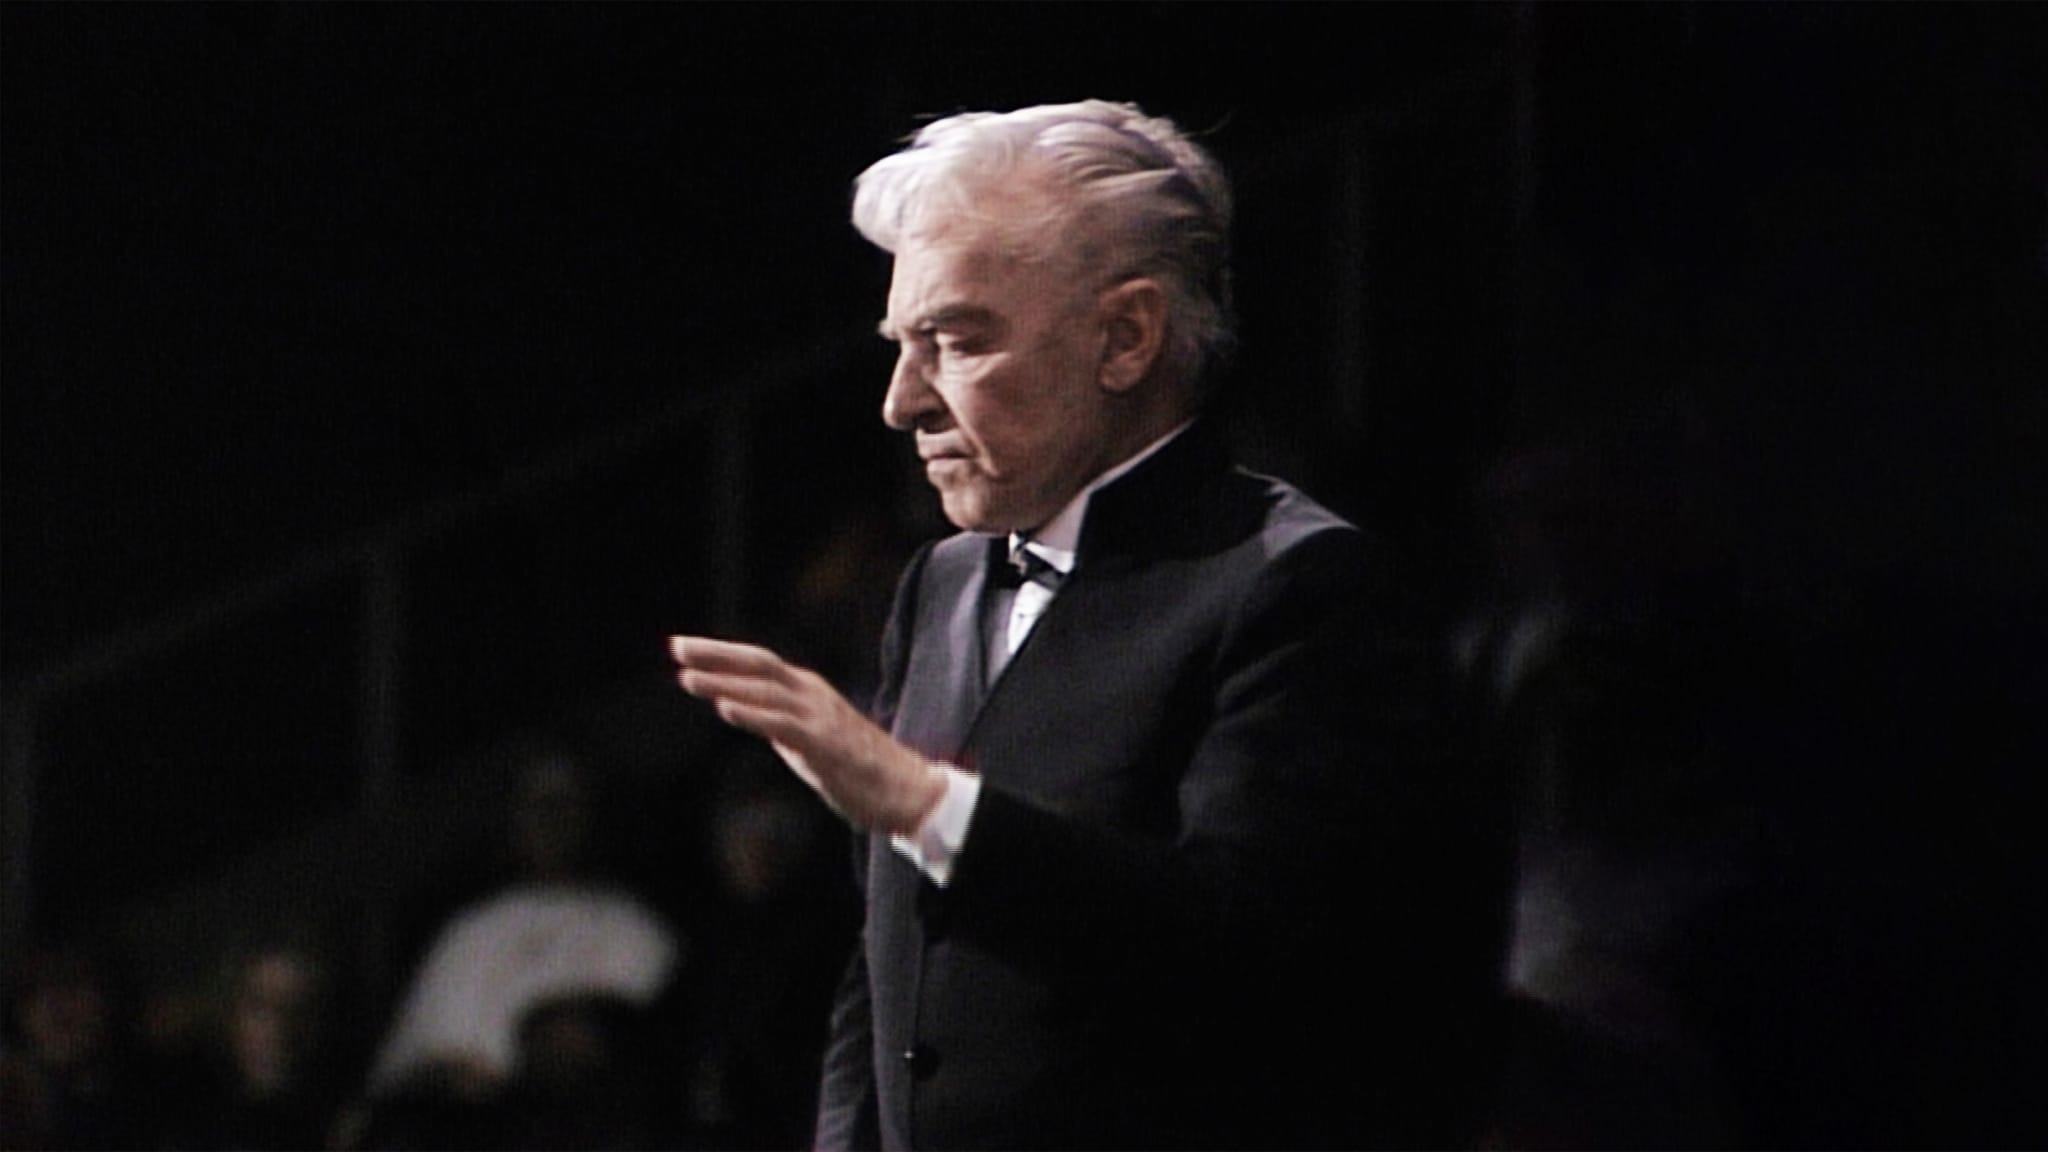 Karajan conducts New Year's Eve Concert in Berlin (1983)